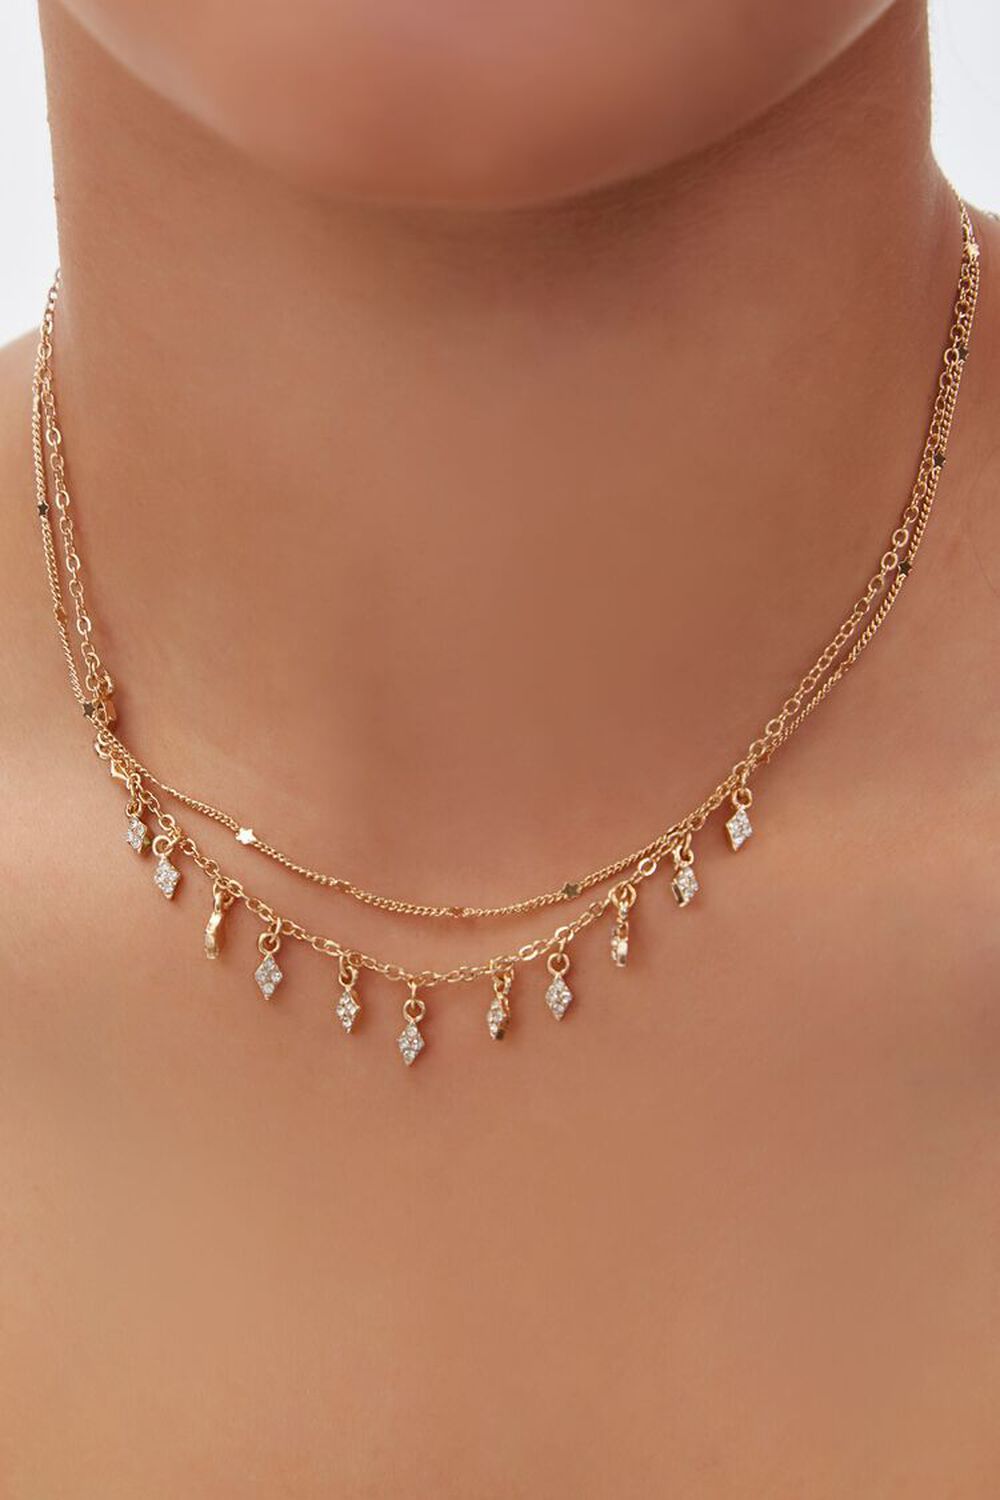 GOLD/CLEAR Faux Gem Charm Chain Necklace, image 1